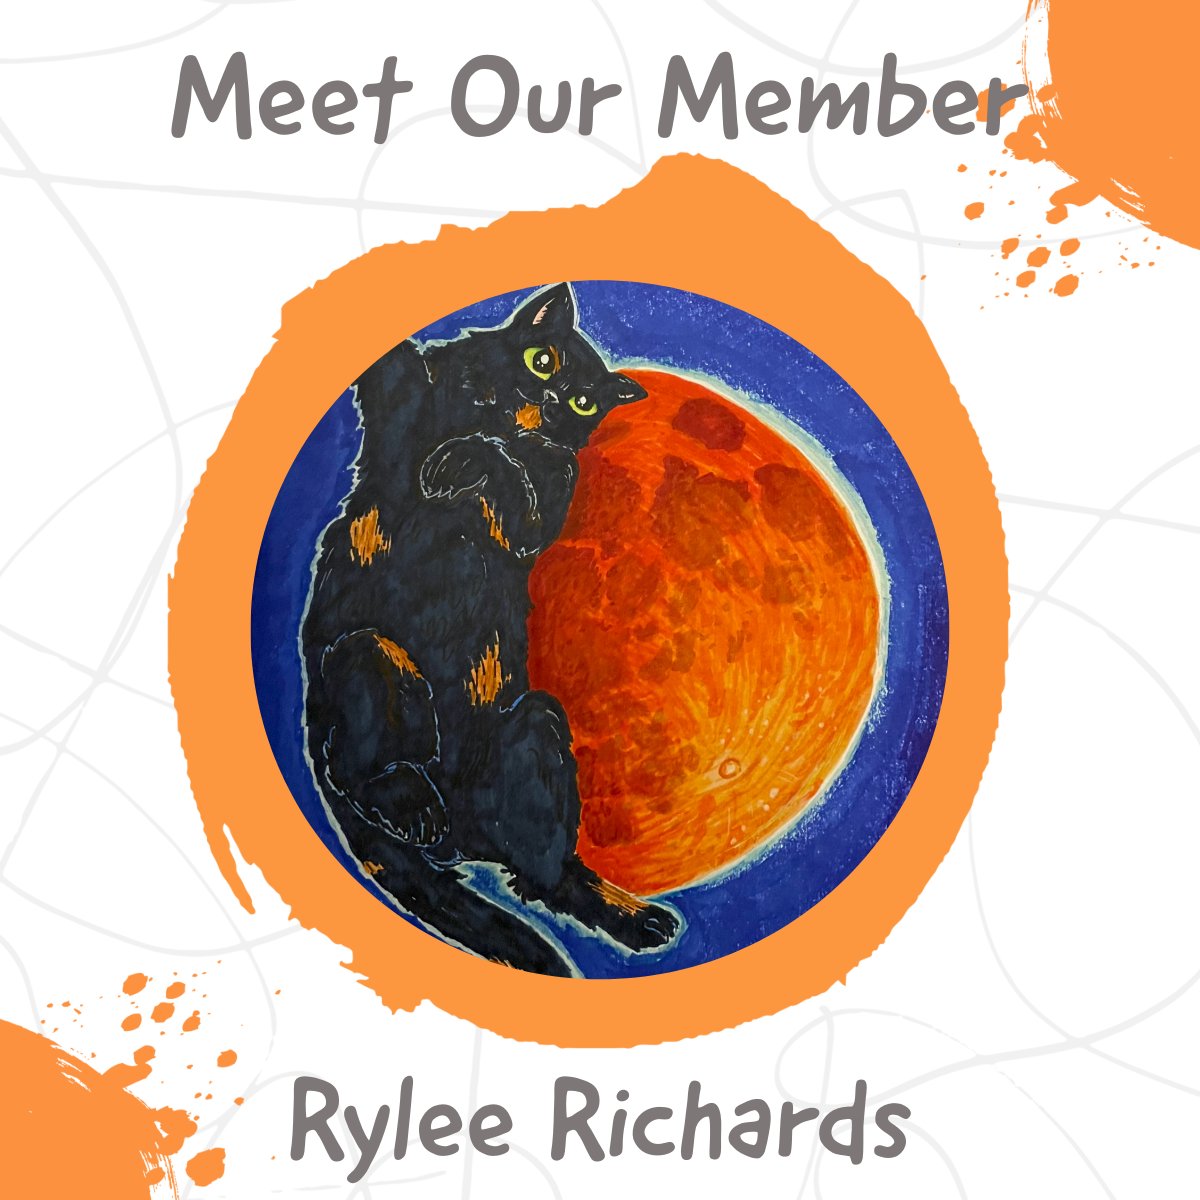 Meet our member, Rylee Richards! Take a moment to explore their work here - 
ryleerichards.wixsite.com/my-site
instagram.com/r_g_art_/
 
#Contemporary #ArtDiscovery #CreativeLife #ArtLovers #InvestInArt #FineArt